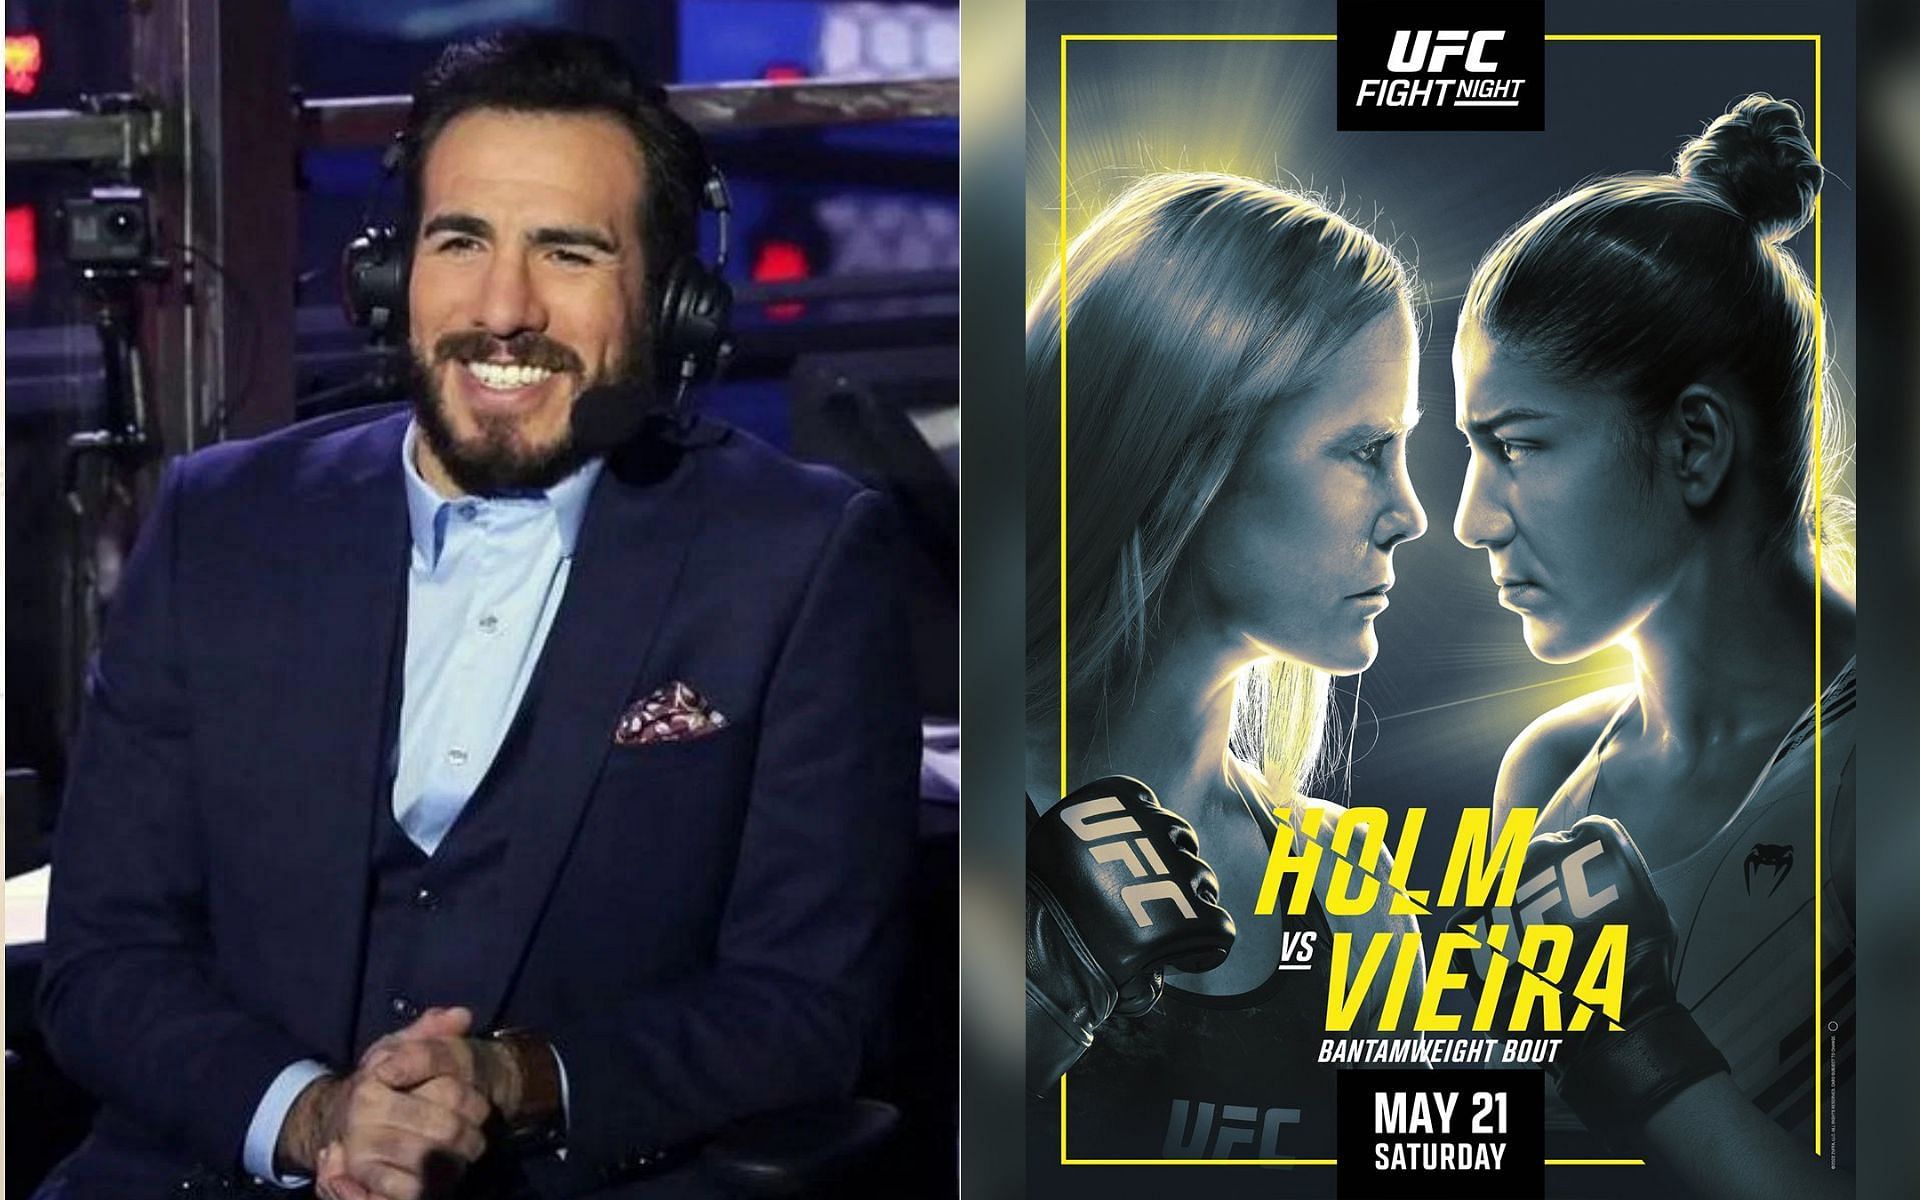 Kenny Florian (left) and Holly Holm &amp; Ketlen Vieira (right) [Image credits: @kennyflorian on Instagram and @ufc on Twitter]